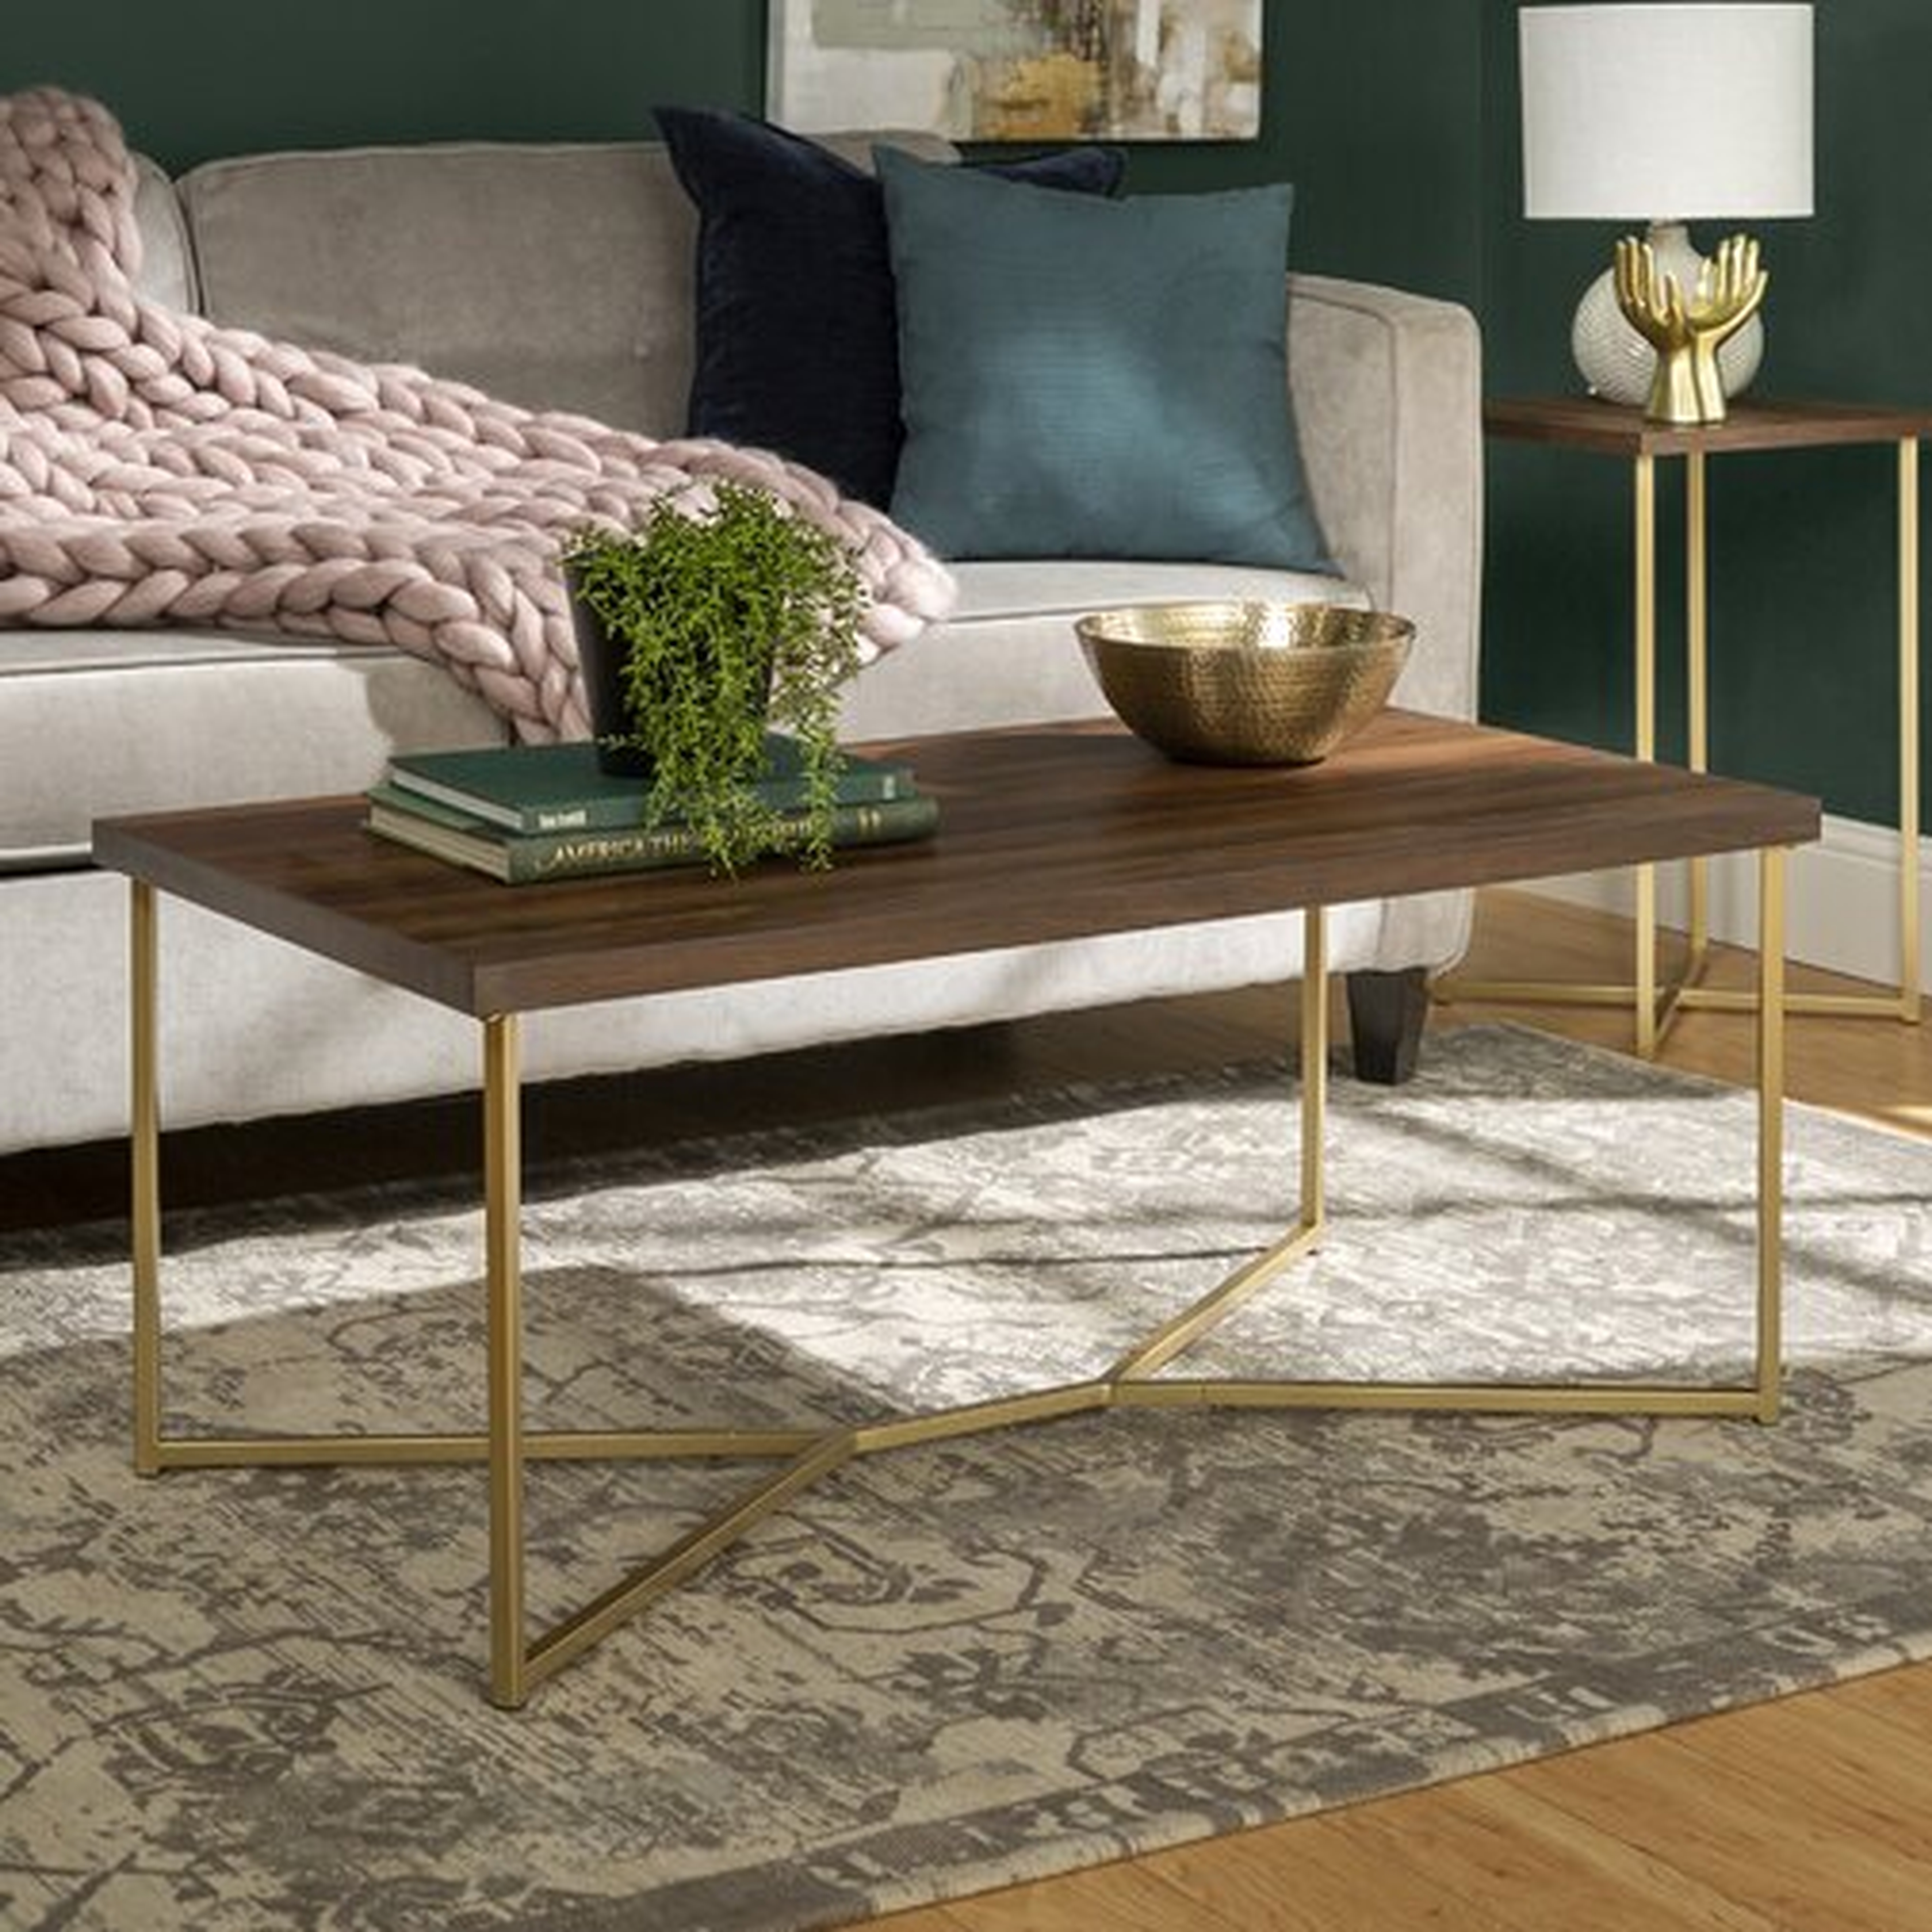 Devito Coffee Table with Tray Top - Wayfair